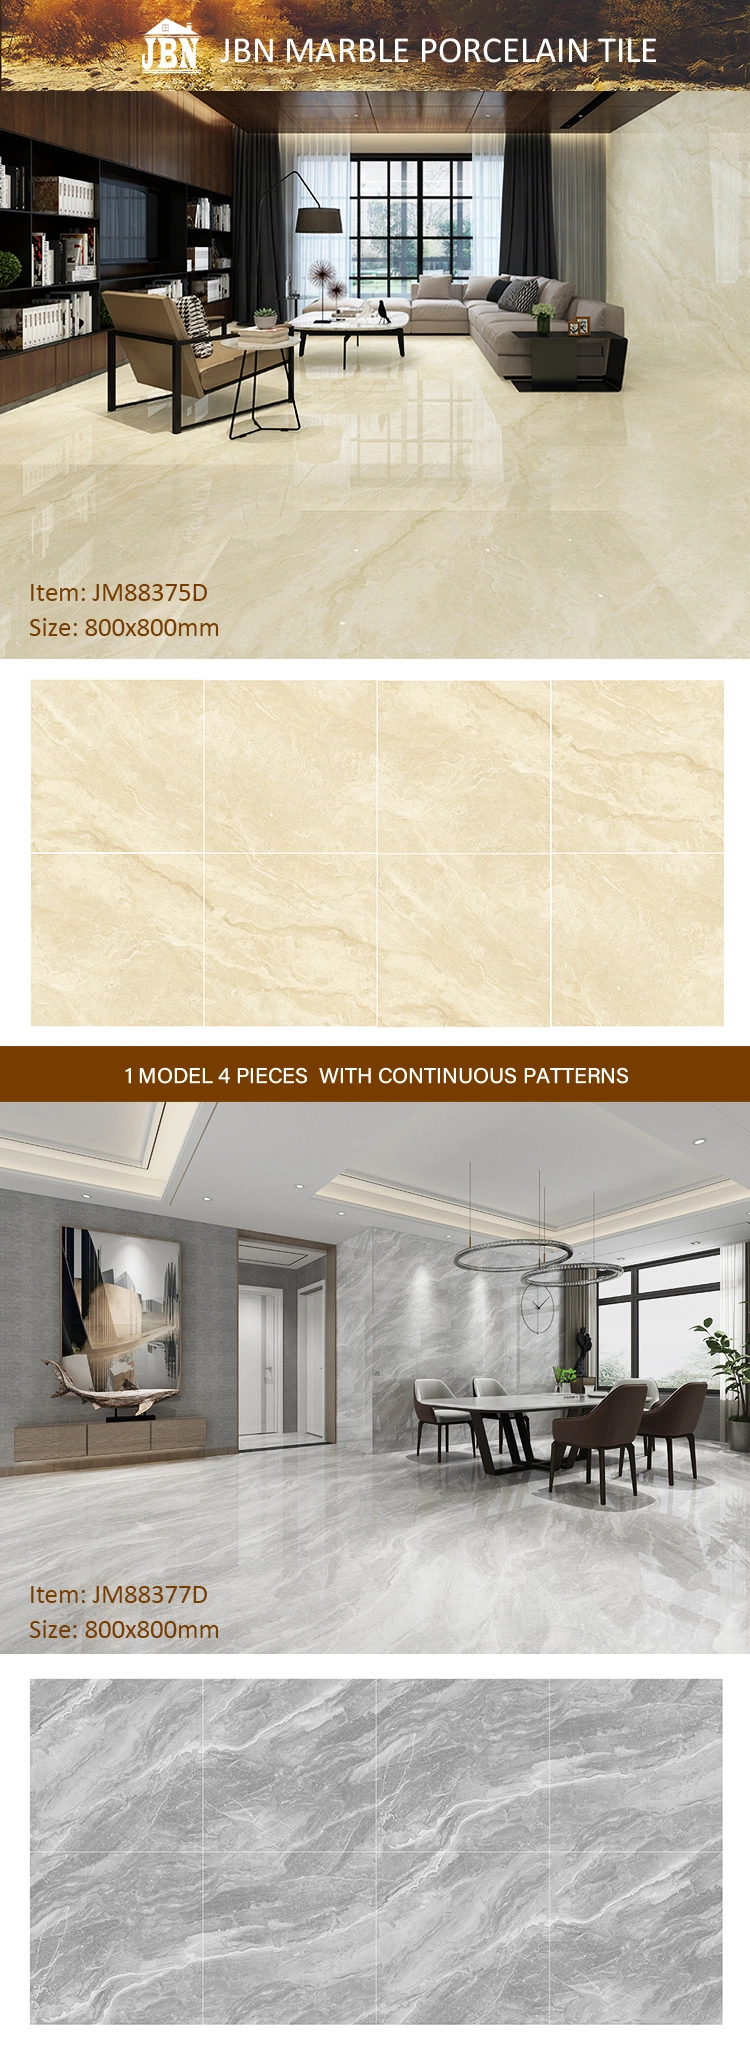 Hot Sale Made in China 800X800 Full Body Thick New Design Texture Finished Porcelain Floor Slab Tile